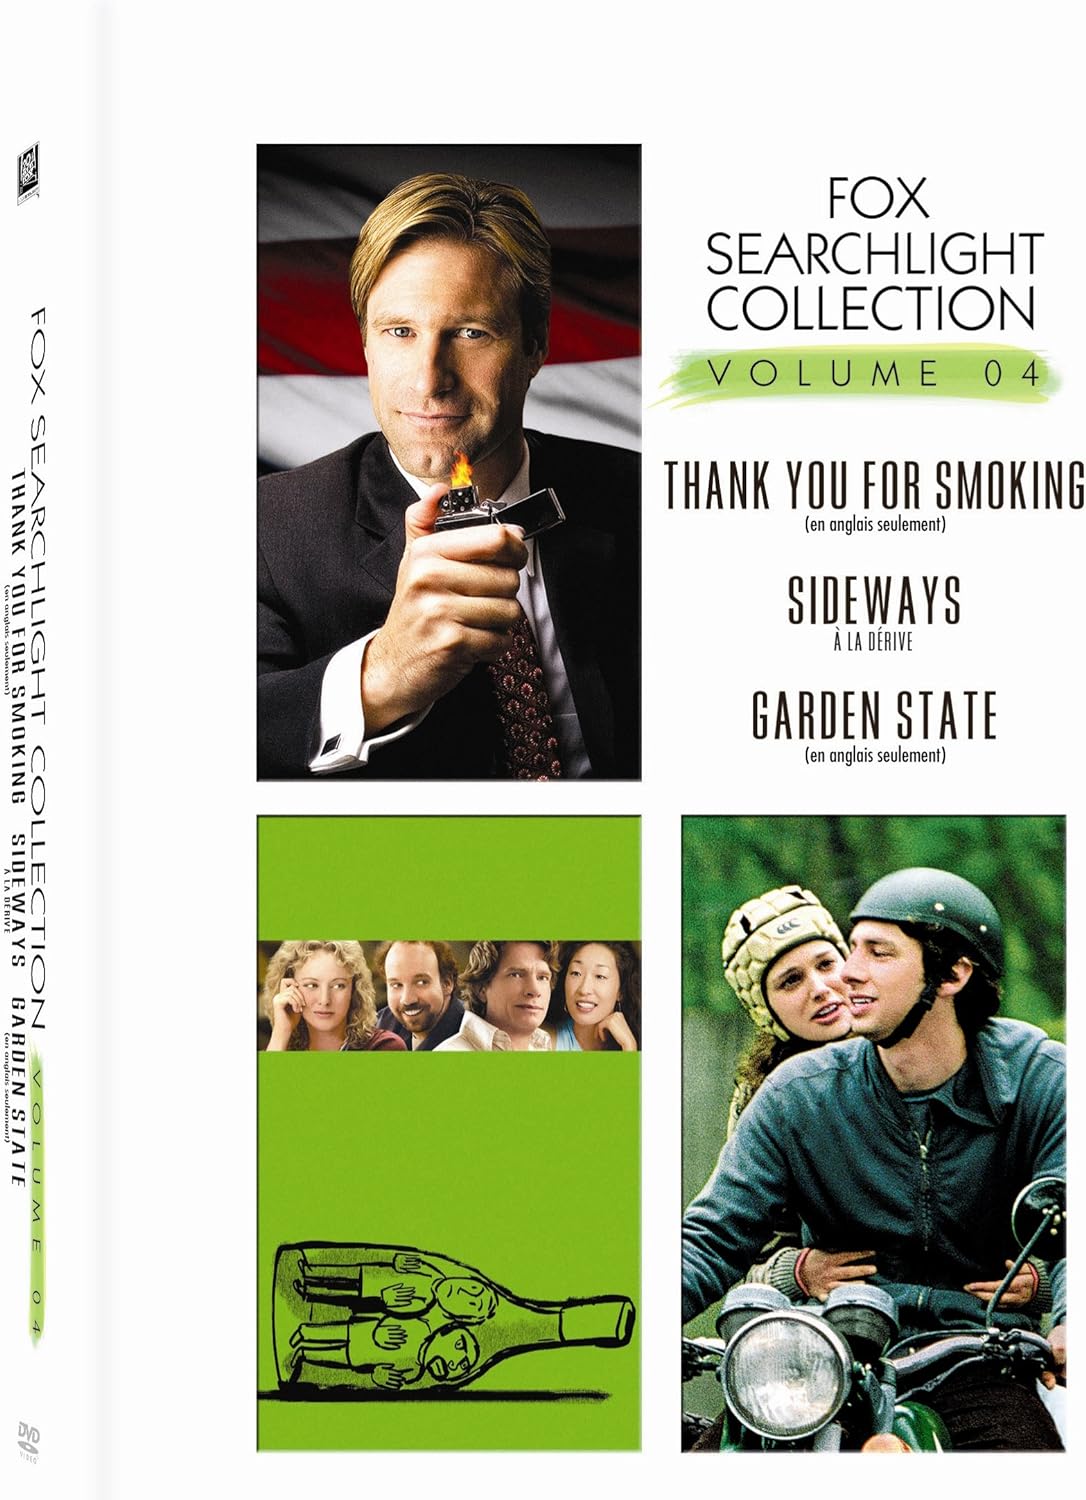 Fox Searchlight Collection: Volume 4 (Thank You For Smoking/Sideways/Garden State) [DVD, Bilingual]